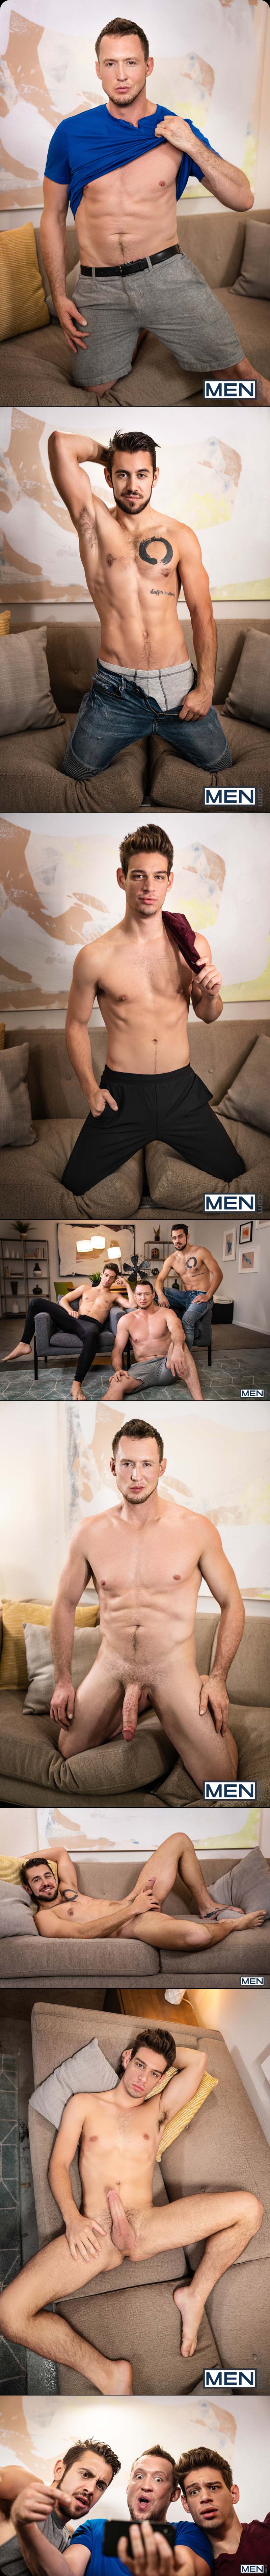 Step Your Bussy Up (Pierce Paris, Dante Colle and Michael DelRay) at MEN